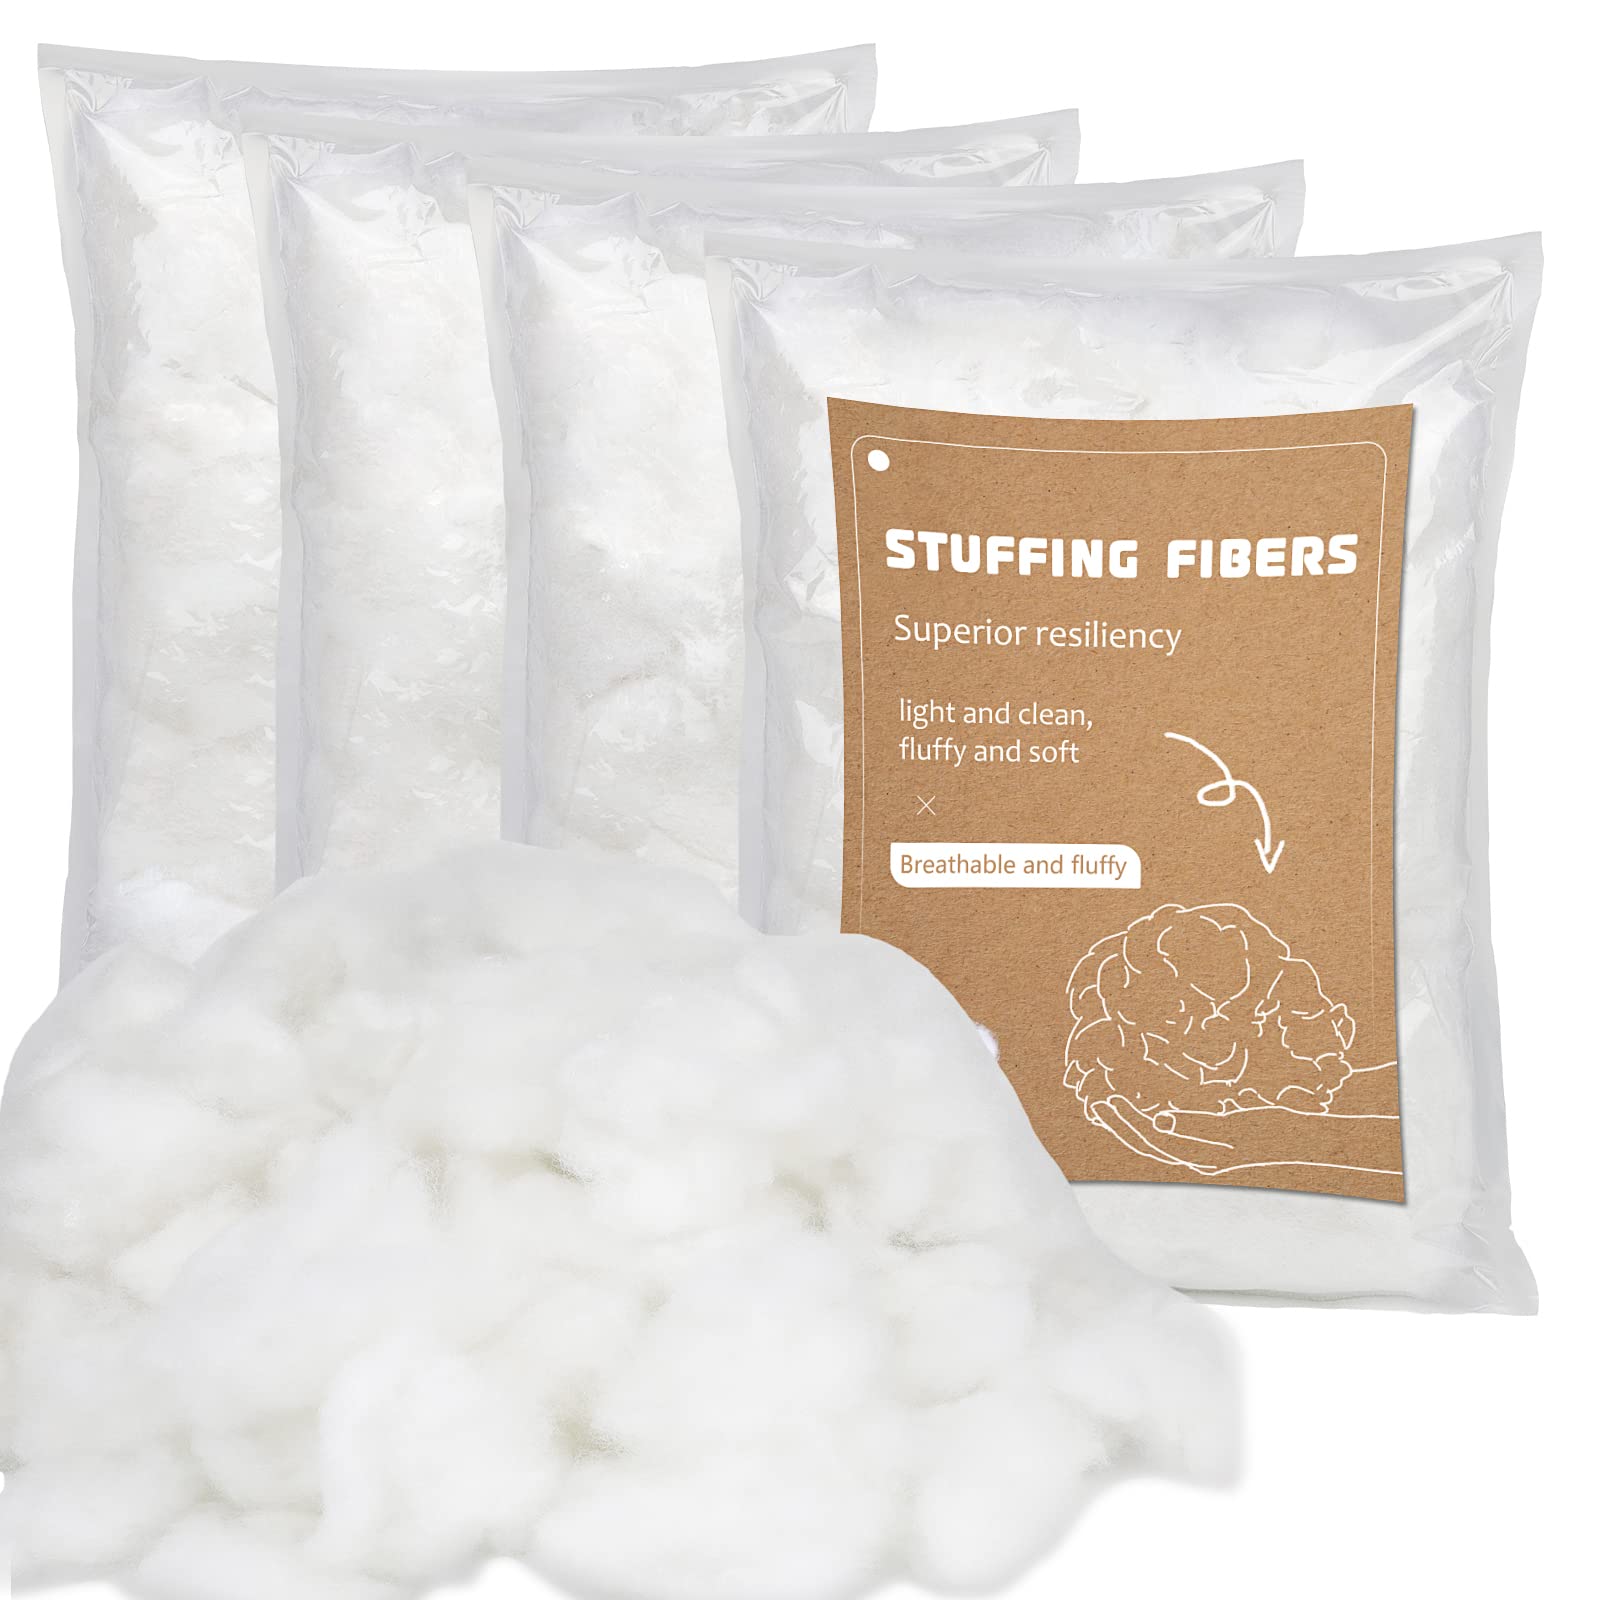 800g/28.22oz Polyester Fiber Filling, Premium Fiber Filling, Super Soft and  High Elastic Filling Fiber, for Stuffing for Small Dolls Part Pillow,Cushion  Stuffing, Animal Crafts,Recyclable